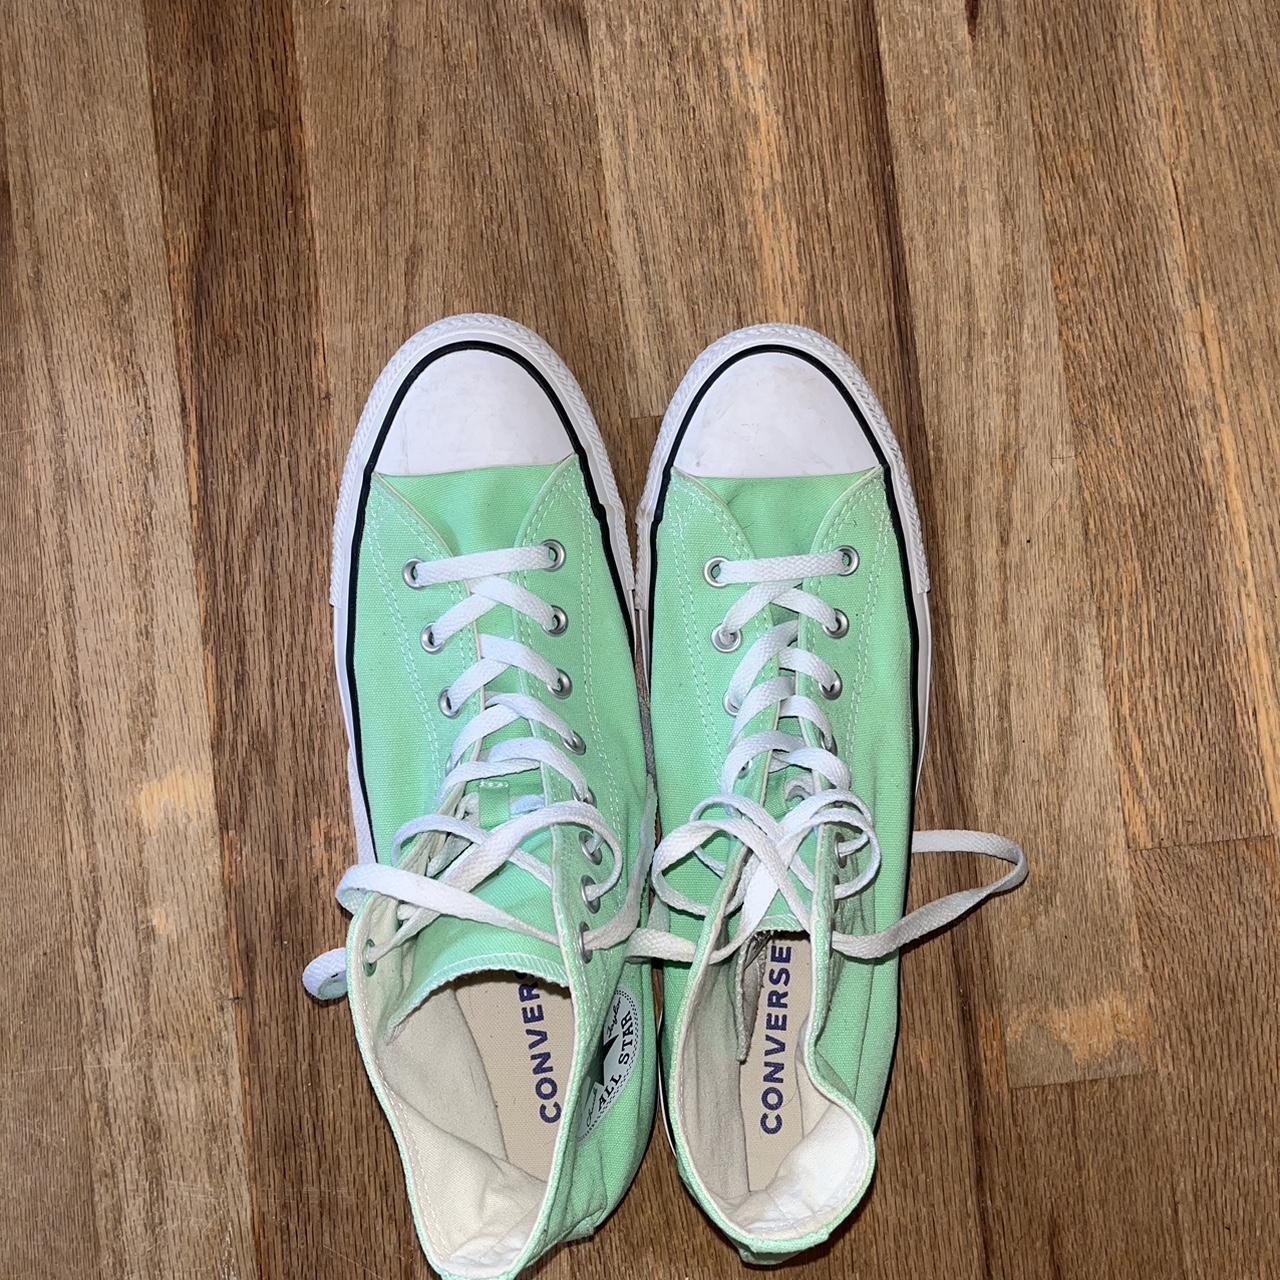 Converse Chuck 70 Lime Green. Barely worn, like new!